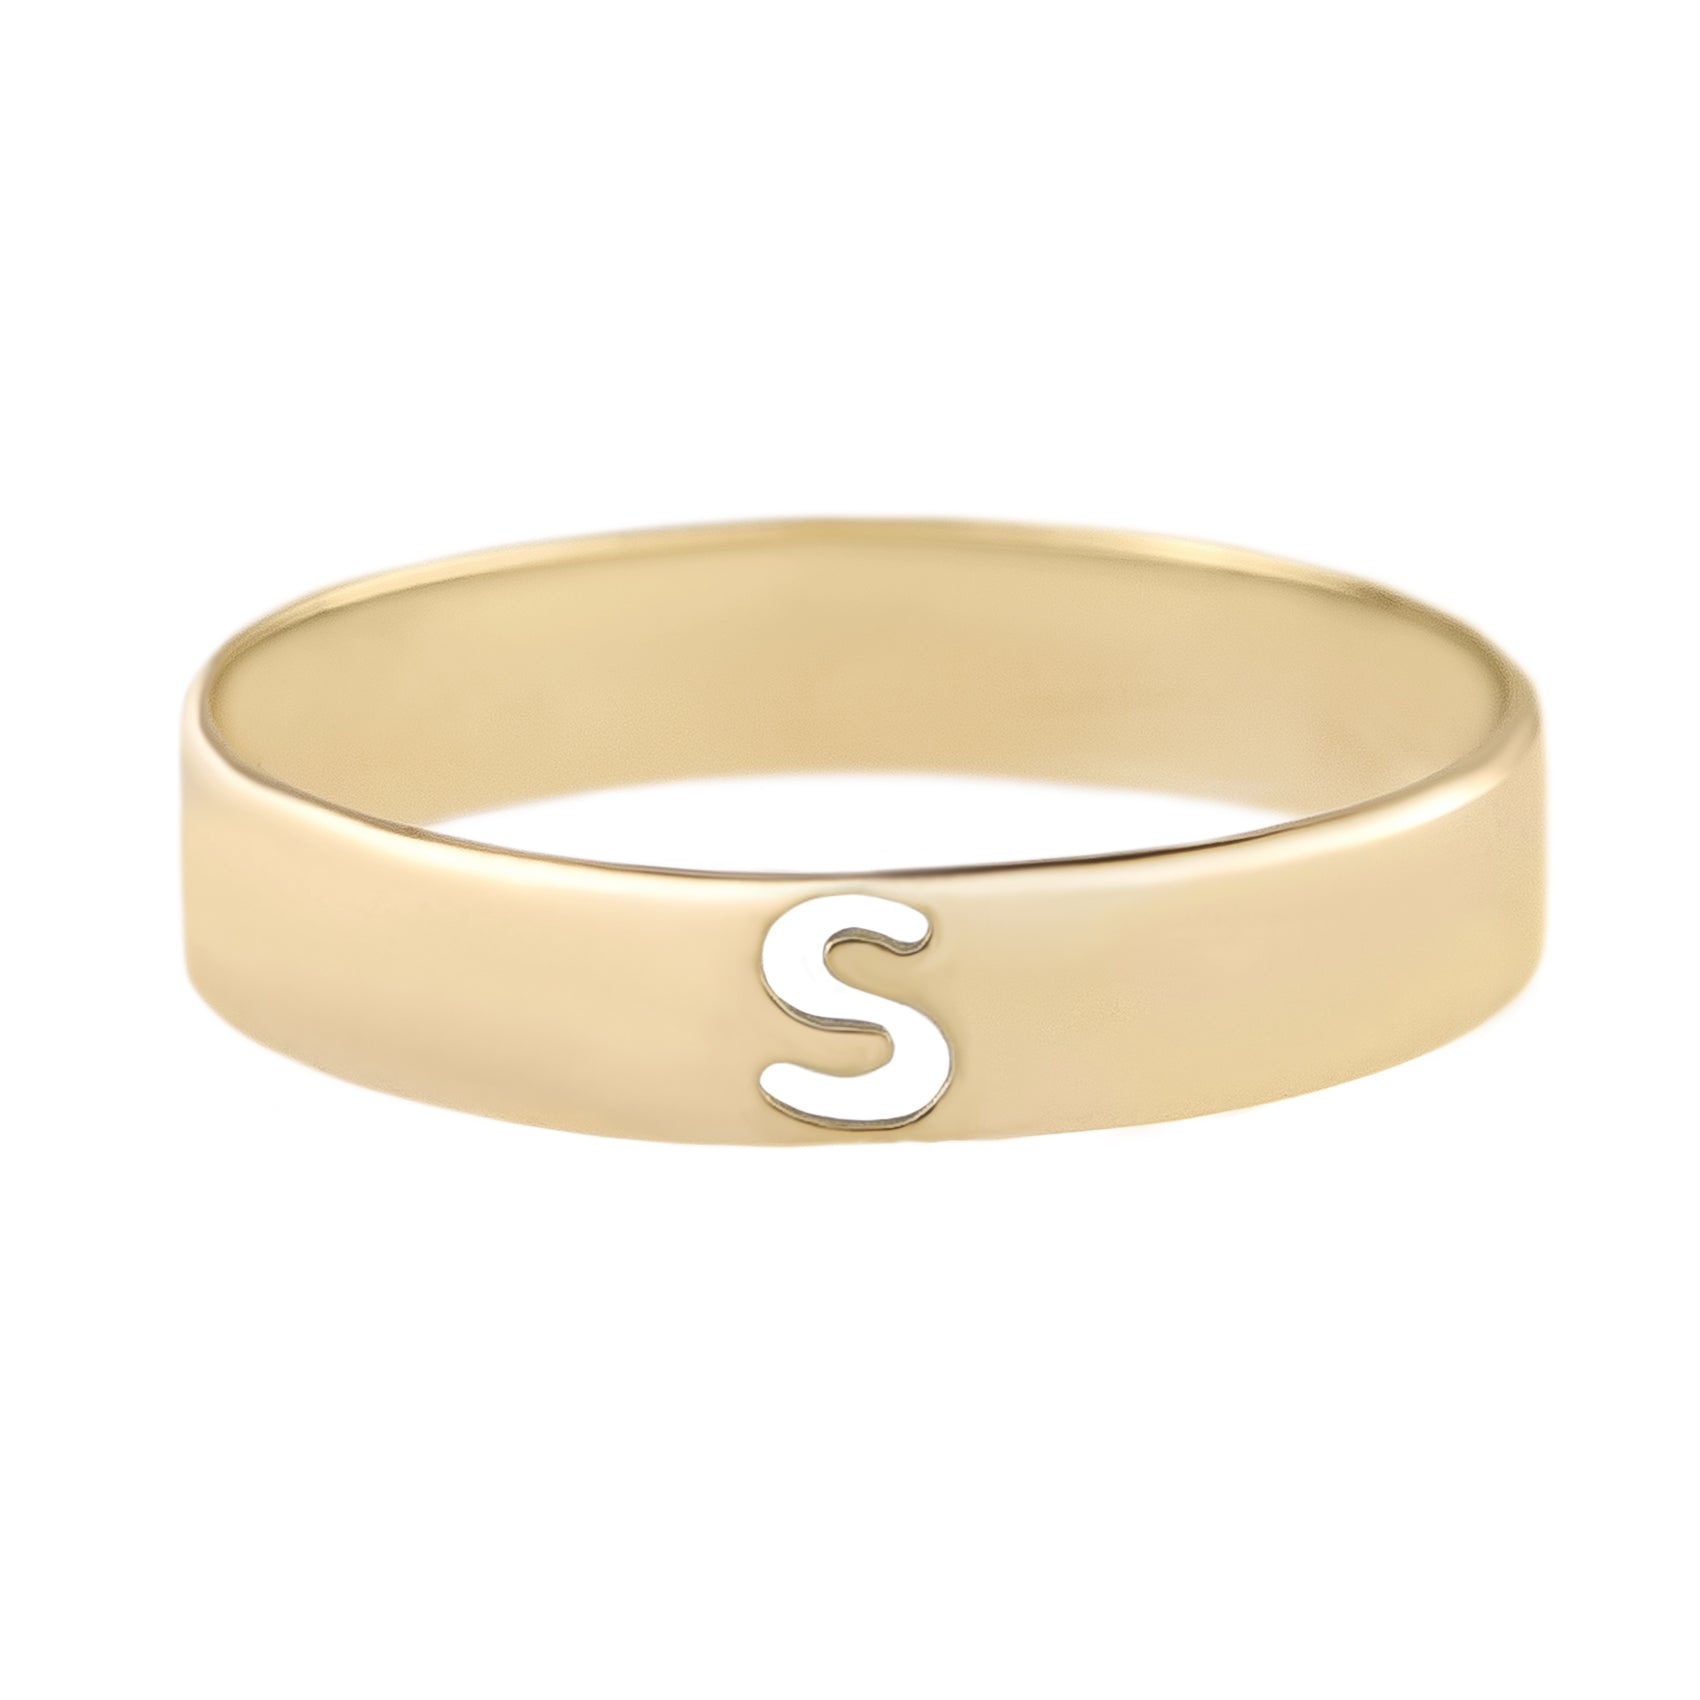 Metier by Tomfoolery: Gold Alphabet Rings 